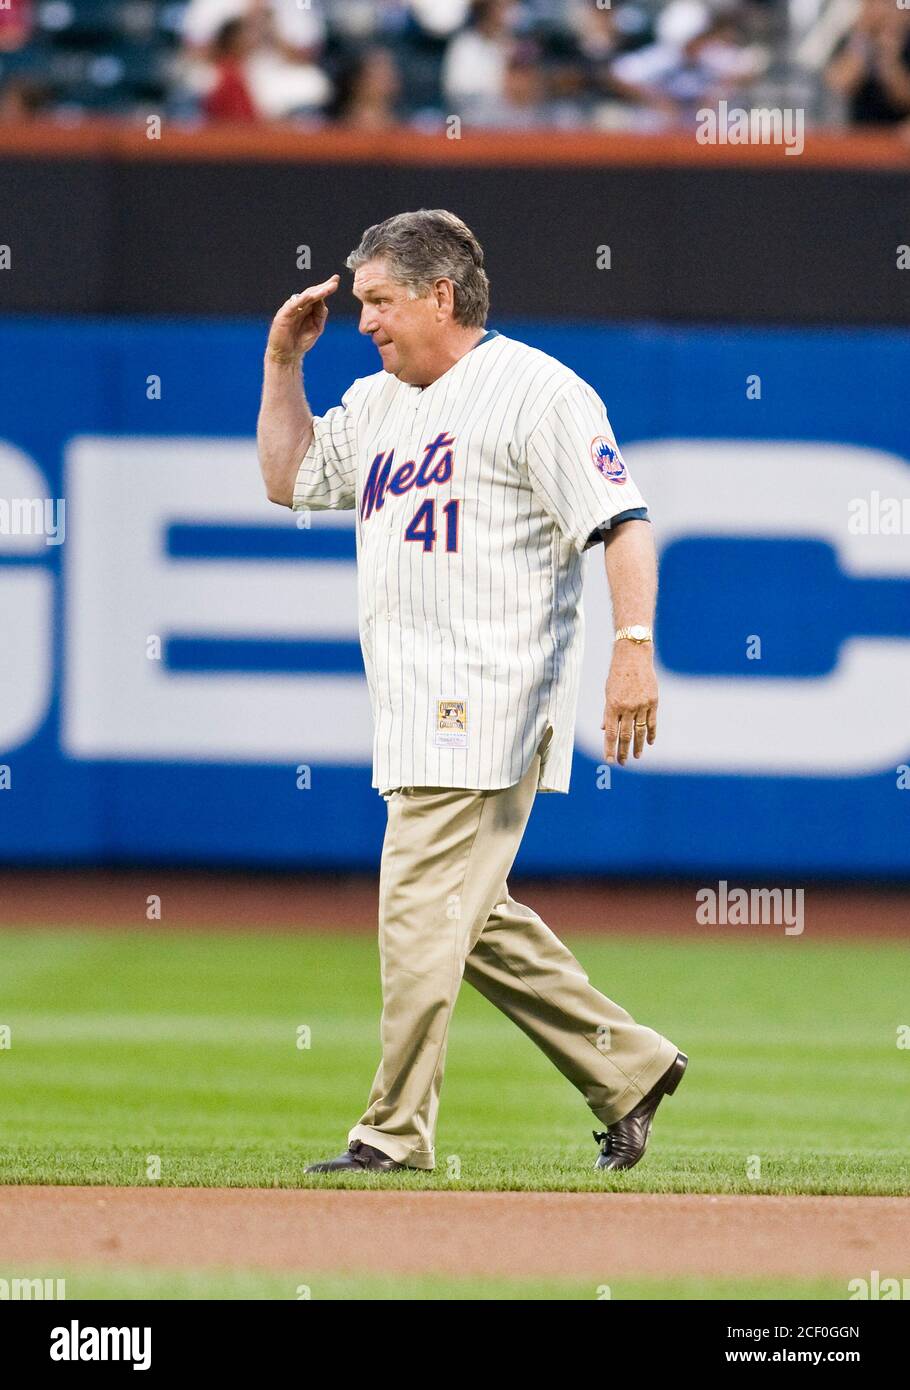 Citi Field. 2nd Sep, 2020. New York Mets legend Tom Seaver, and Hall of Fame right-hander, who earned the nickname 'Tom Terrific' died on Wednesday at the age of 75 from complications from Lyme disease. FILE PICTURE: August 22 2009: TOM SEAVER (41) of the 1969 Miracle Mets World Series Champions during their 40th anniversary ceremony before game time between the New York Mets and the Philadelphia Phillies at Citi Field. The Phillies defeated the Mets 4-1. Credit: csm/Alamy Live News Stock Photo